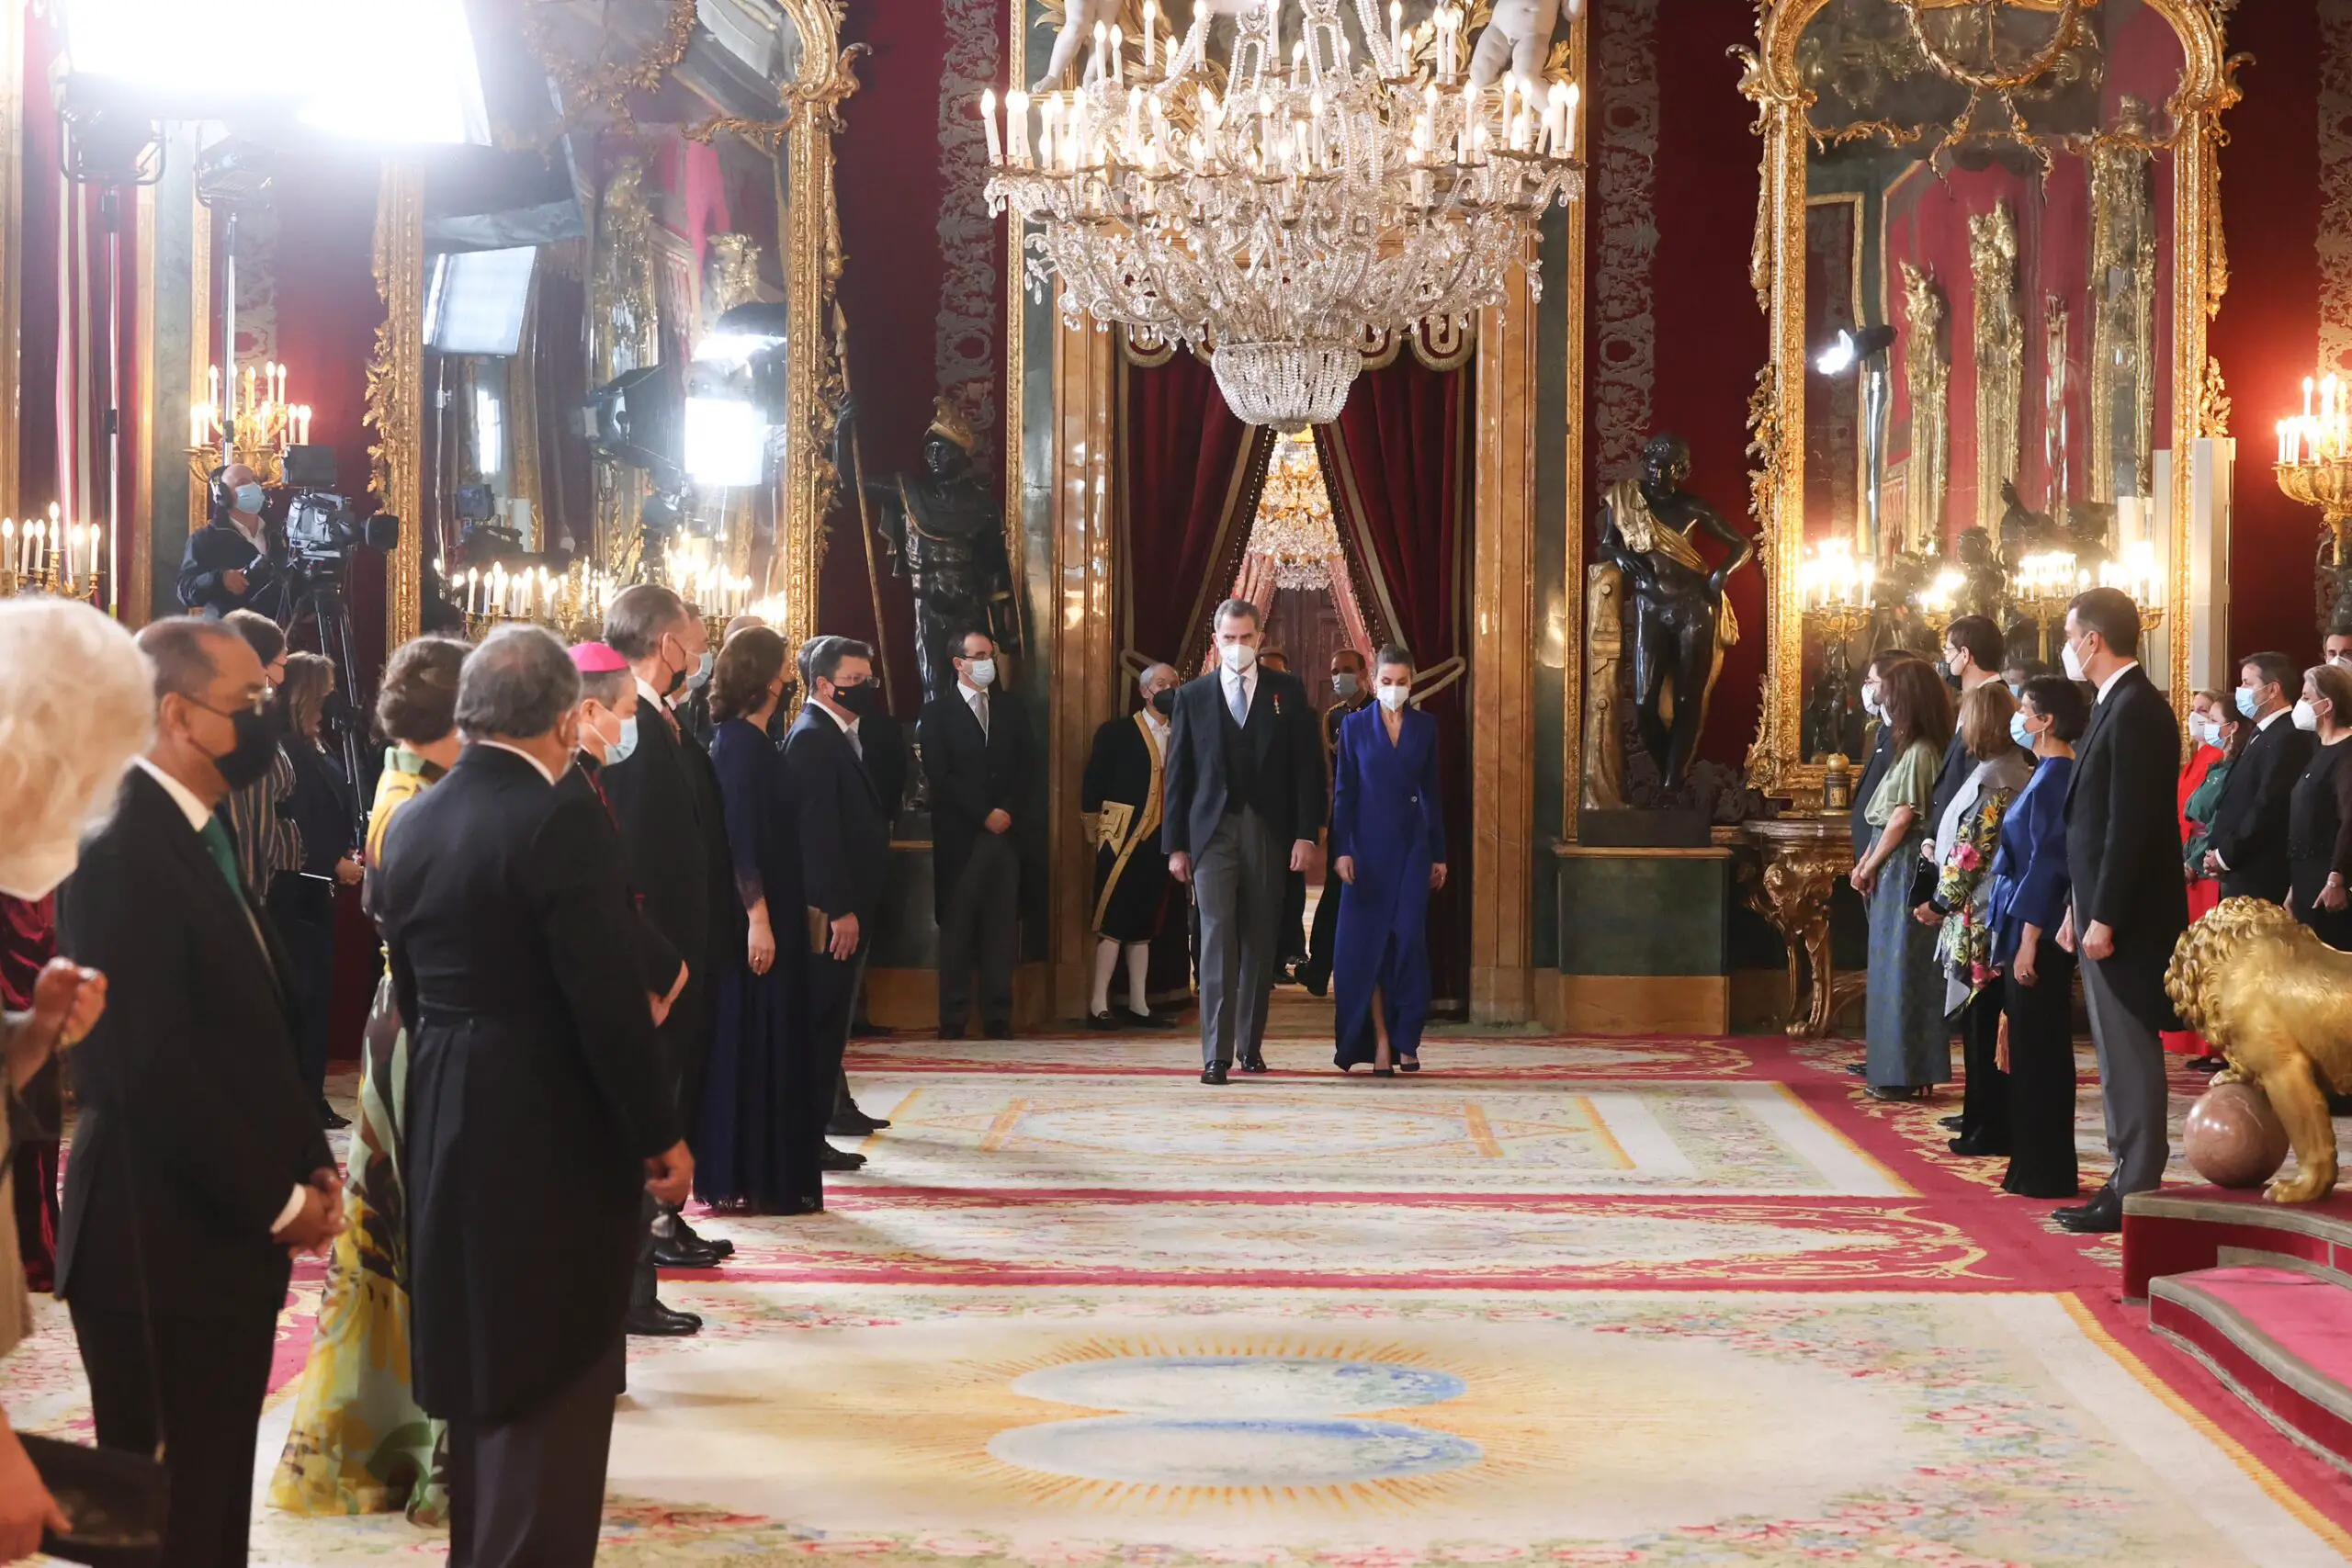 King Felipe and Queen Letizia in the Throne Room of Royal Palace of Zarzuela